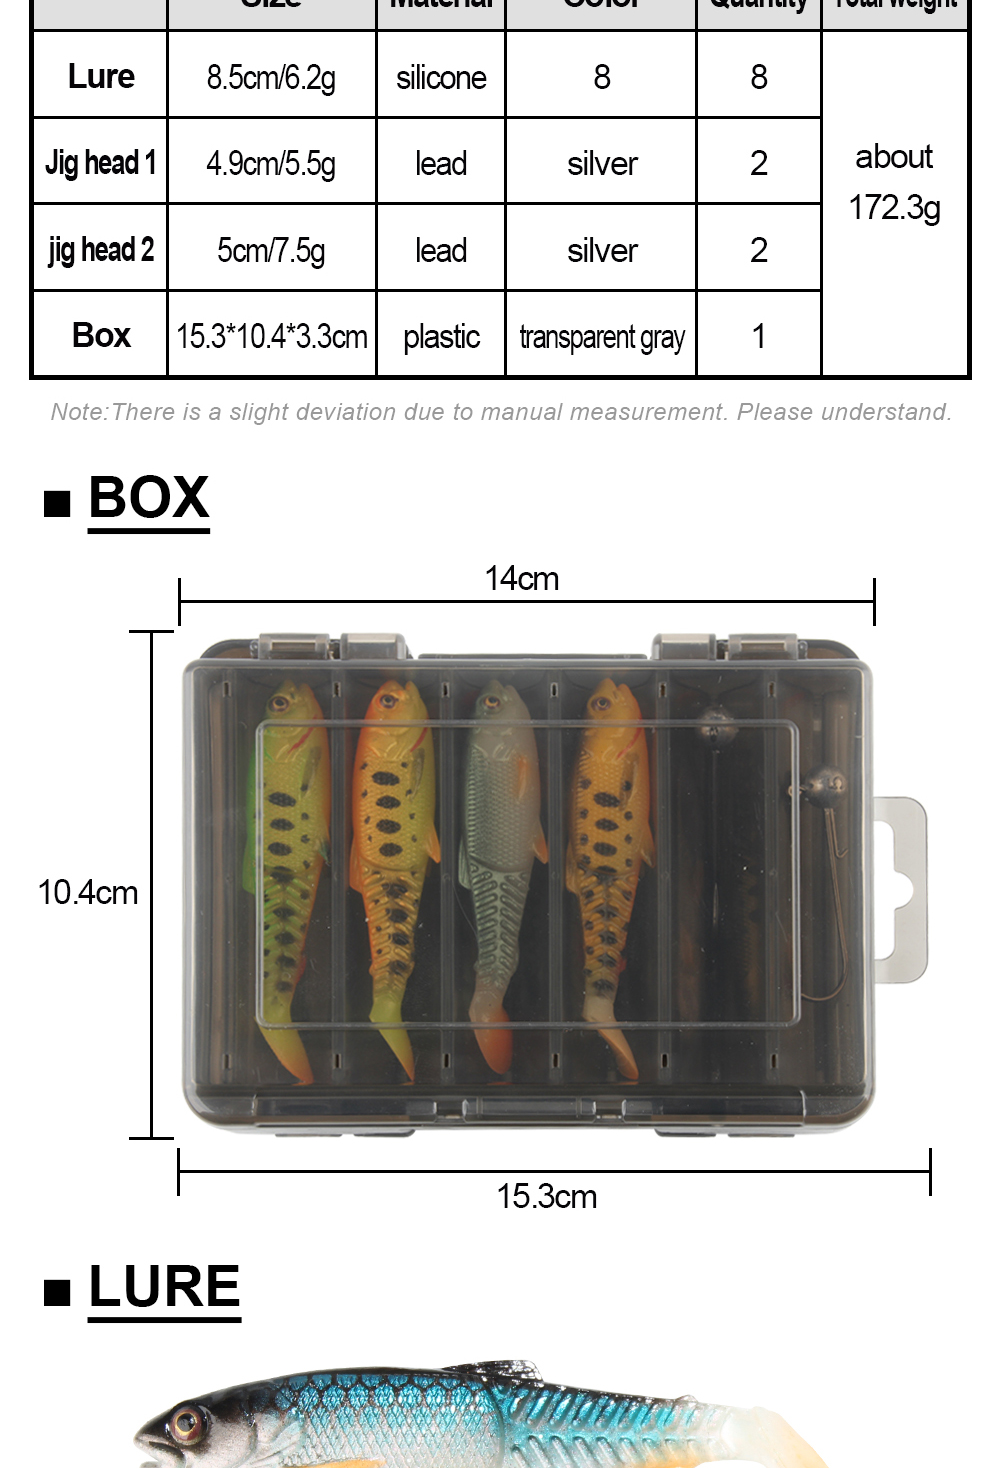 Spinpoler Soft Fishing Lure 8pcs Mixed Color With Lead Jig head hook kit  Artificial Bait Fishing Tackle Swimbait BassPikePerch